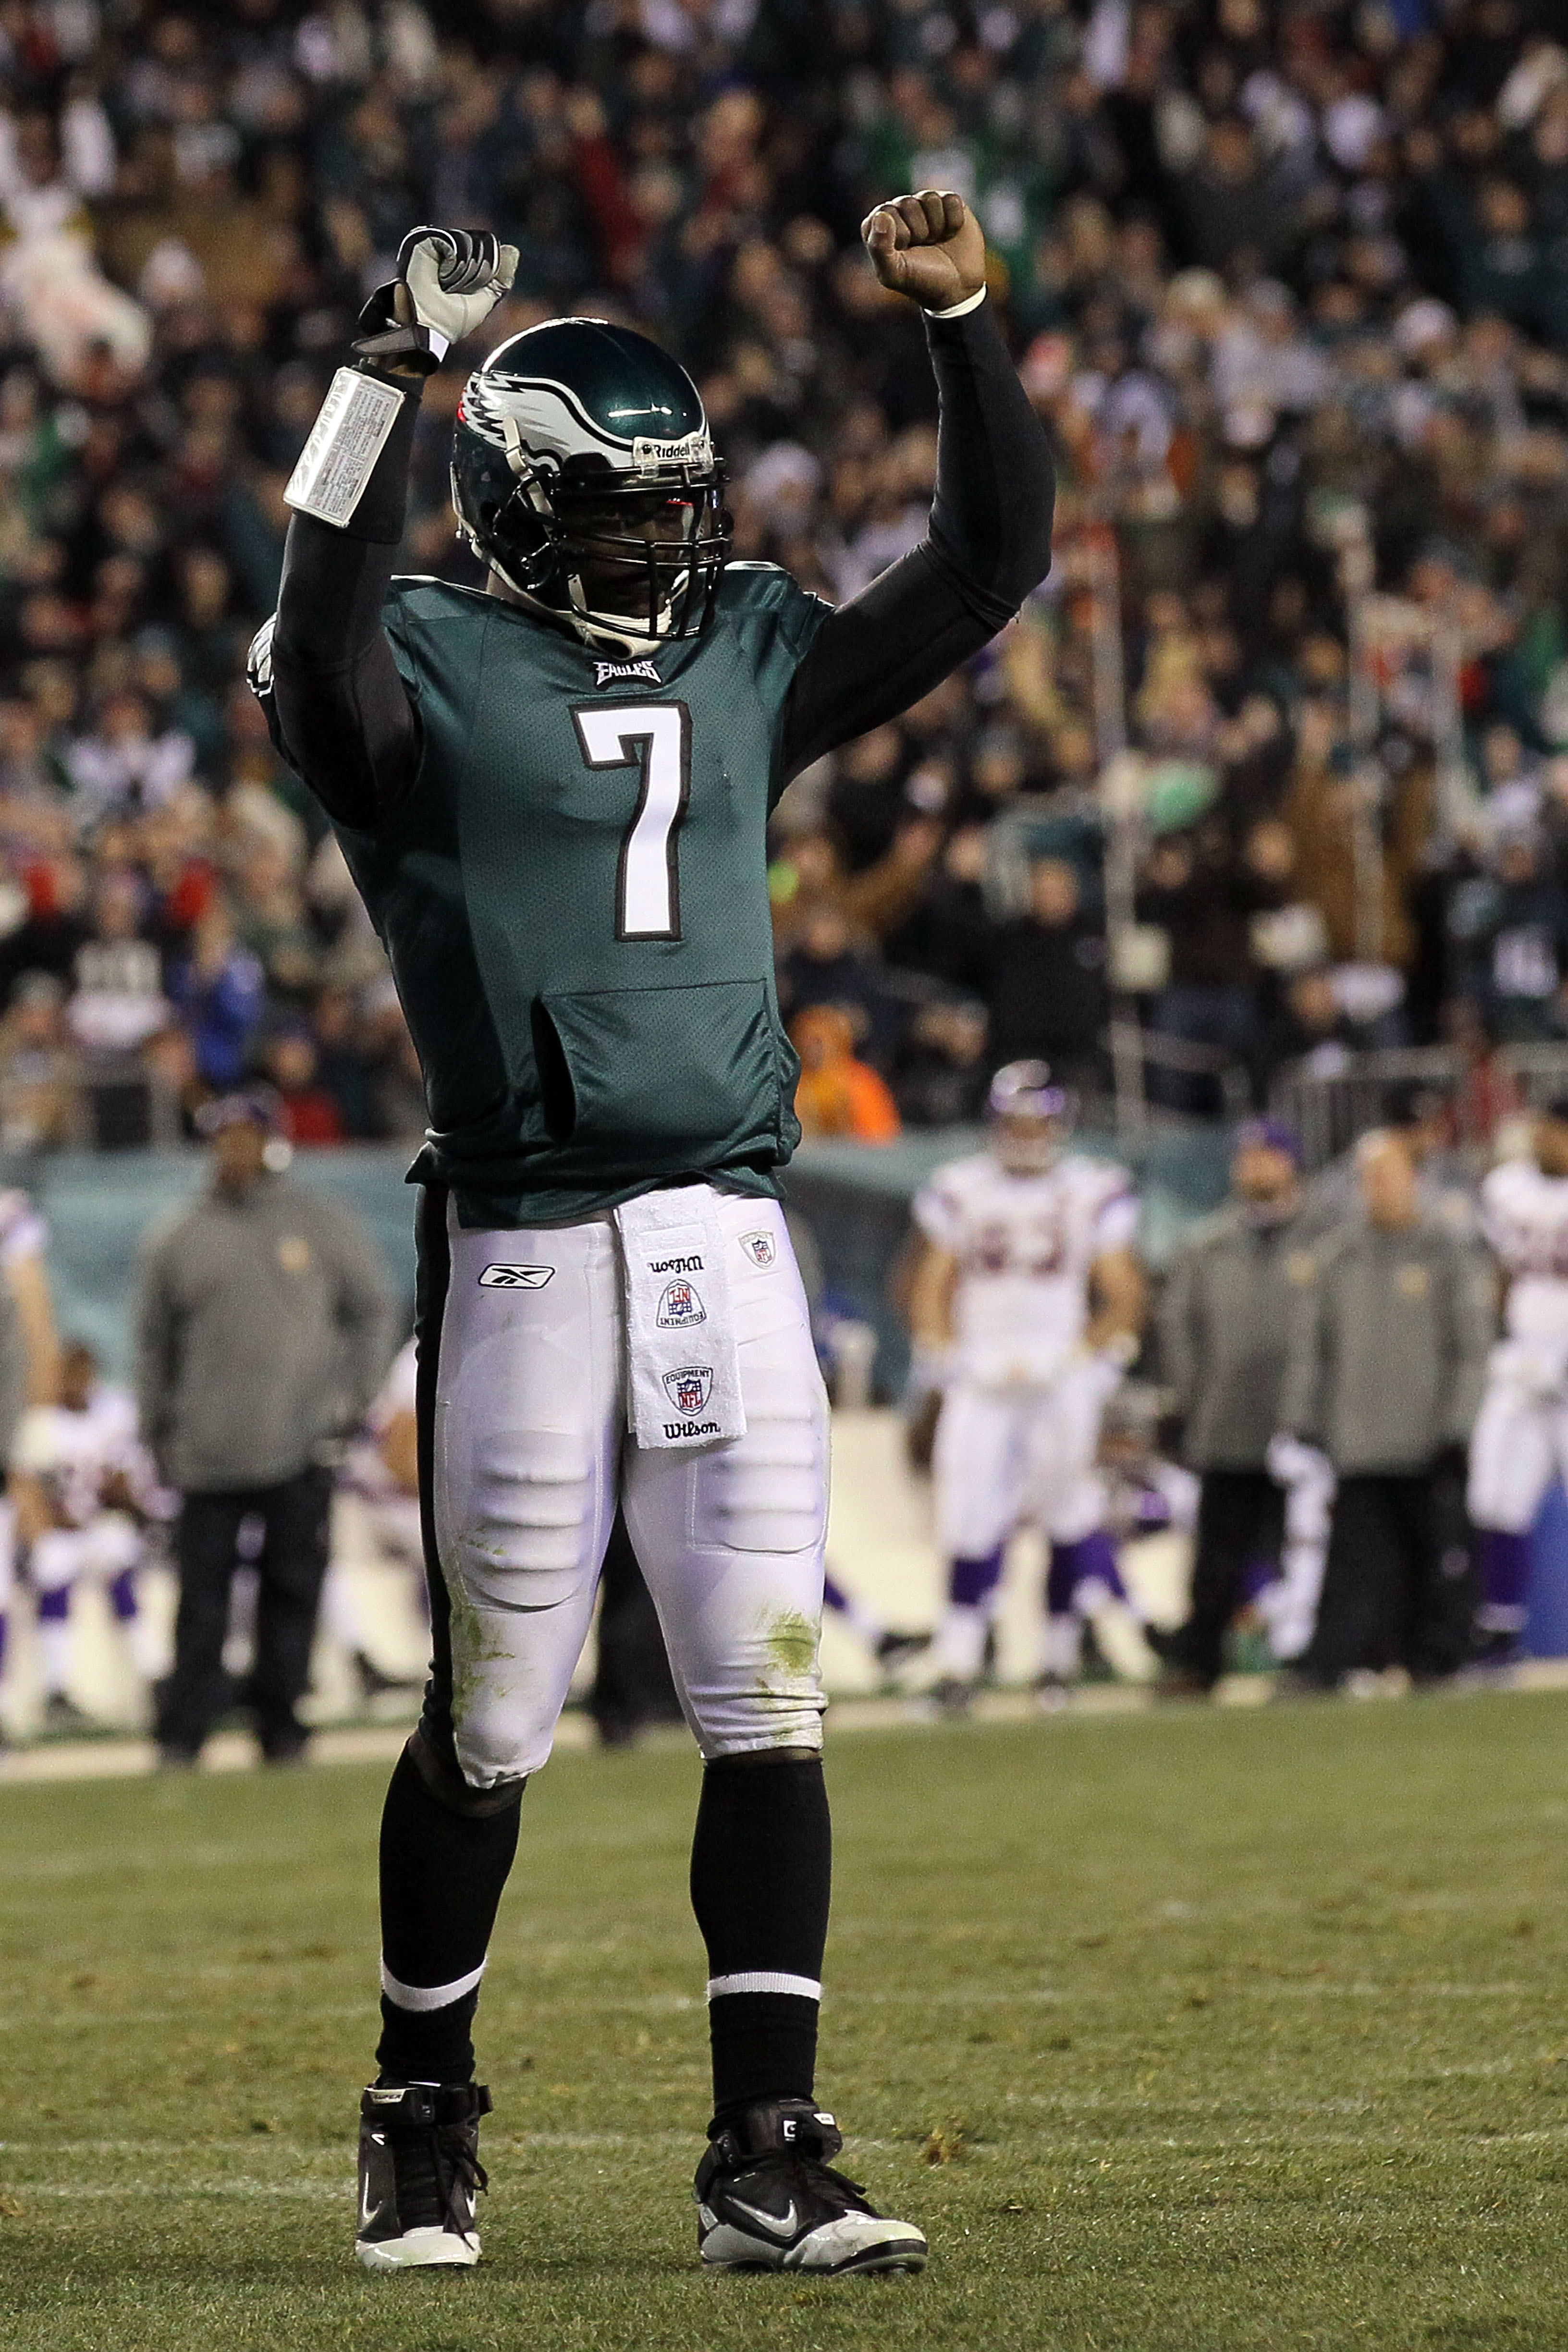 PHILADELPHIA, PA - DECEMBER 28: Michael Vick #7 of the Philadelphia Eagles celebrates after a touchdown against the Minnesota Vikings at Lincoln Financial Field on December 28, 2010 in Philadelphia, Pennsylvania. (Photo by Jim McIsaac/Getty Images)